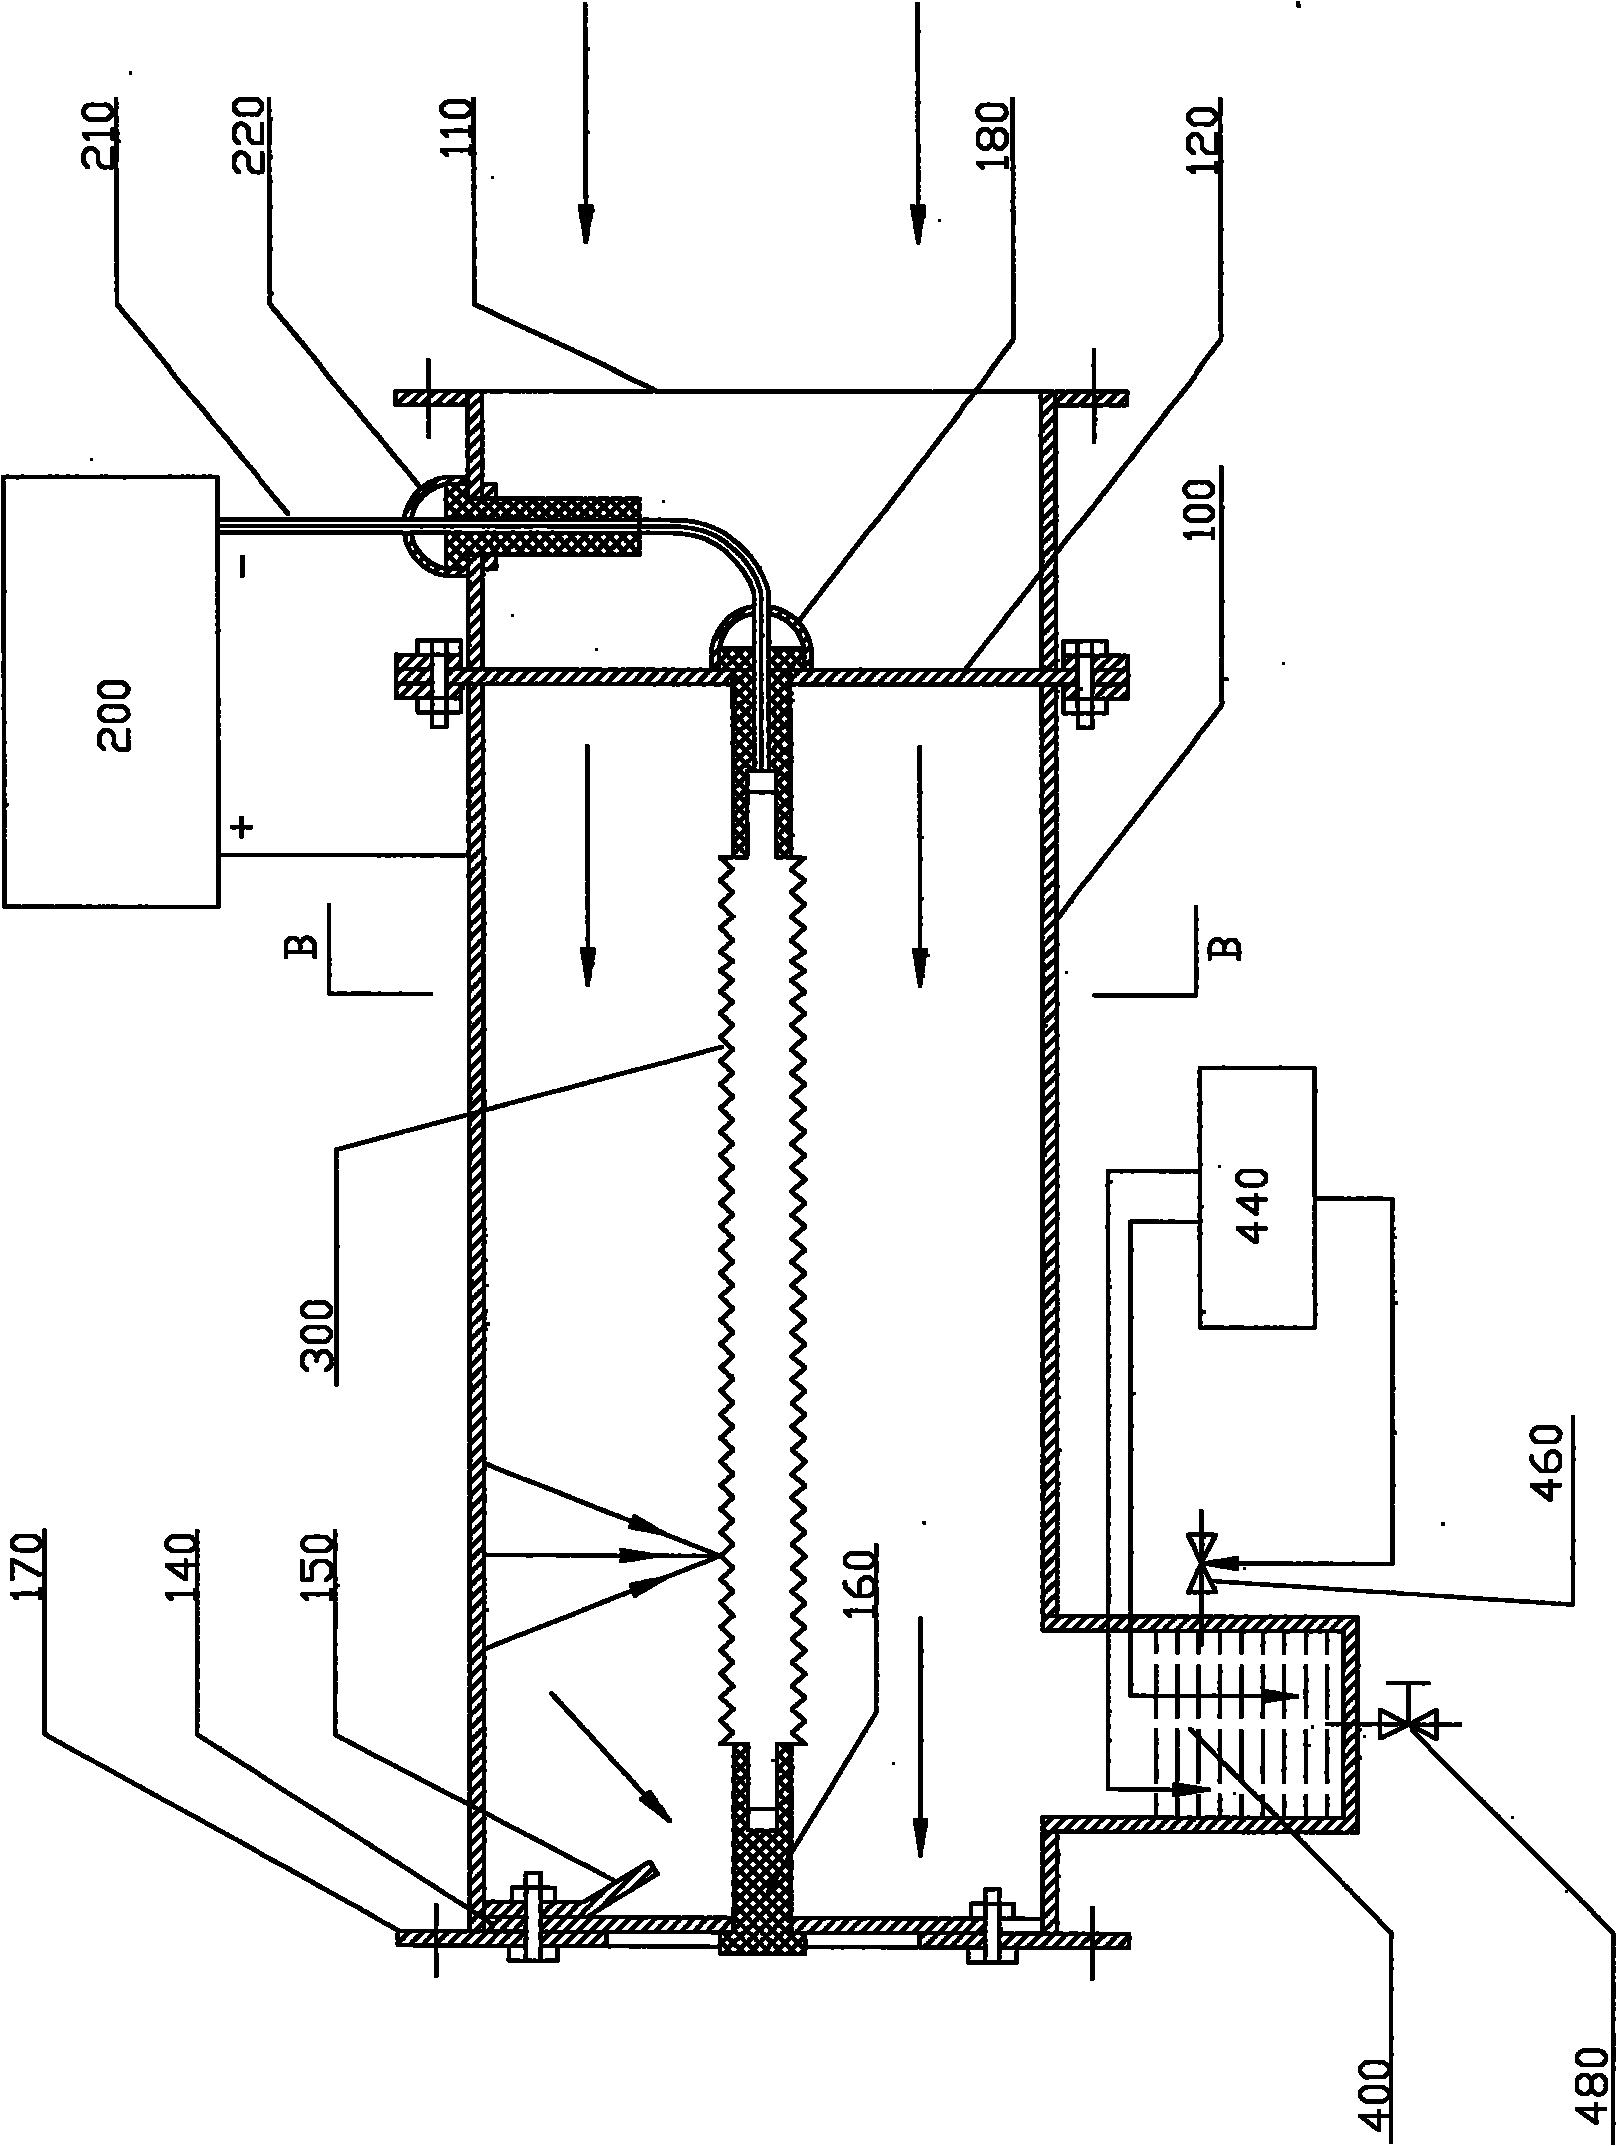 Dust removal device for intake air of automotive vehicle